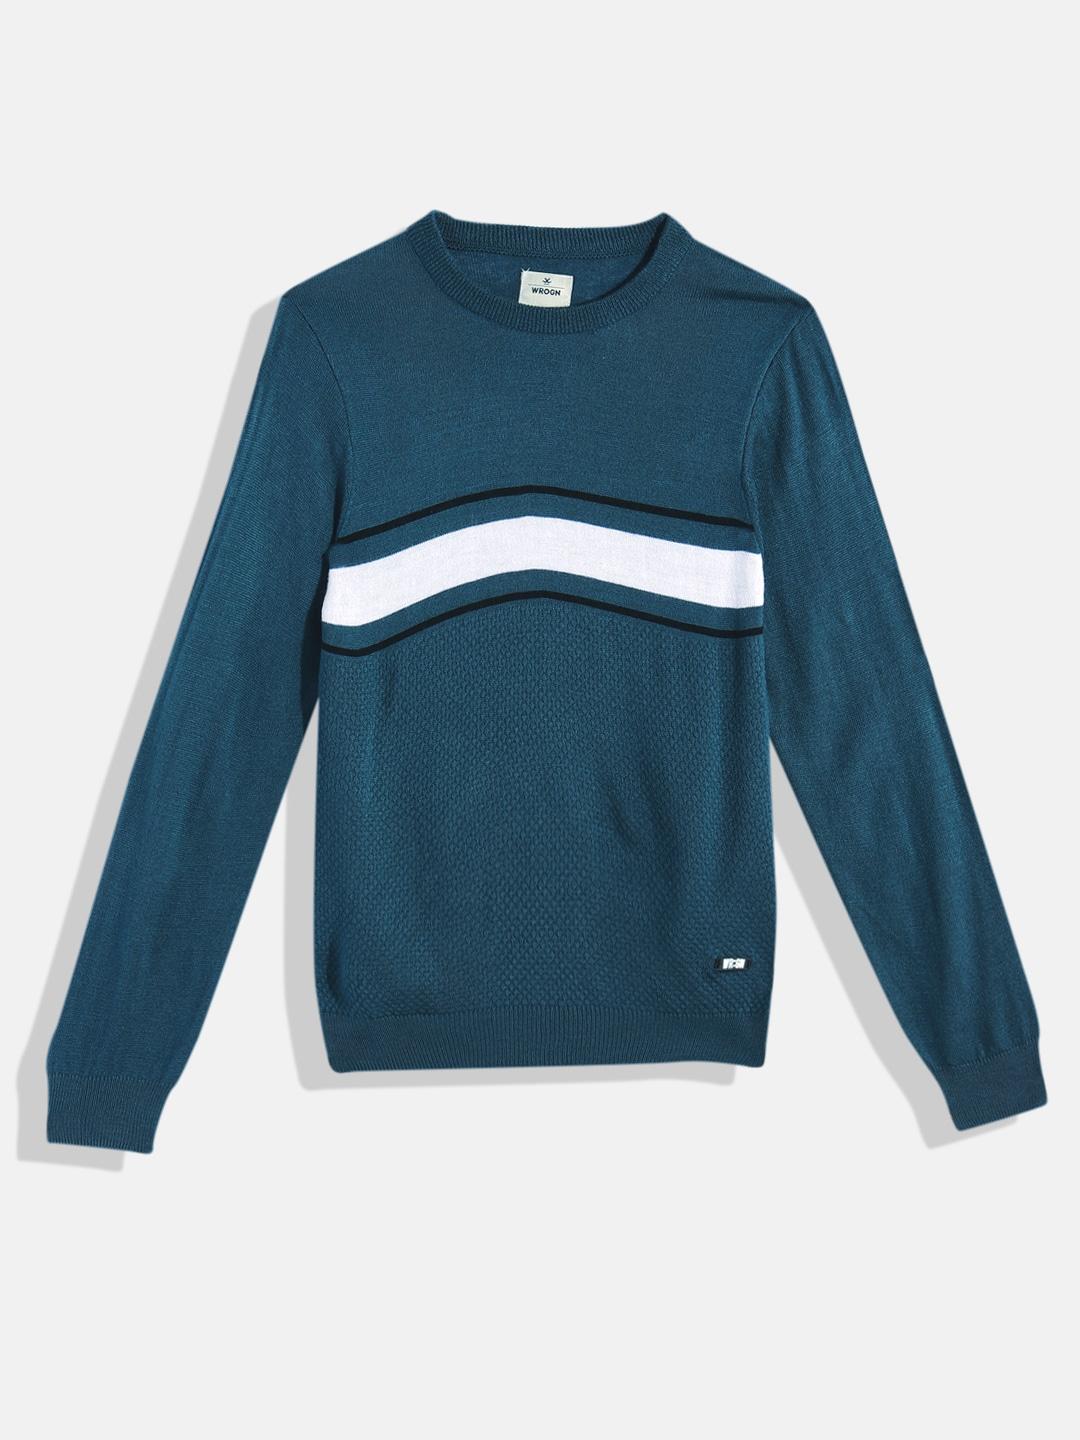 wrogn youth boys teal blue acrylic striped pullover